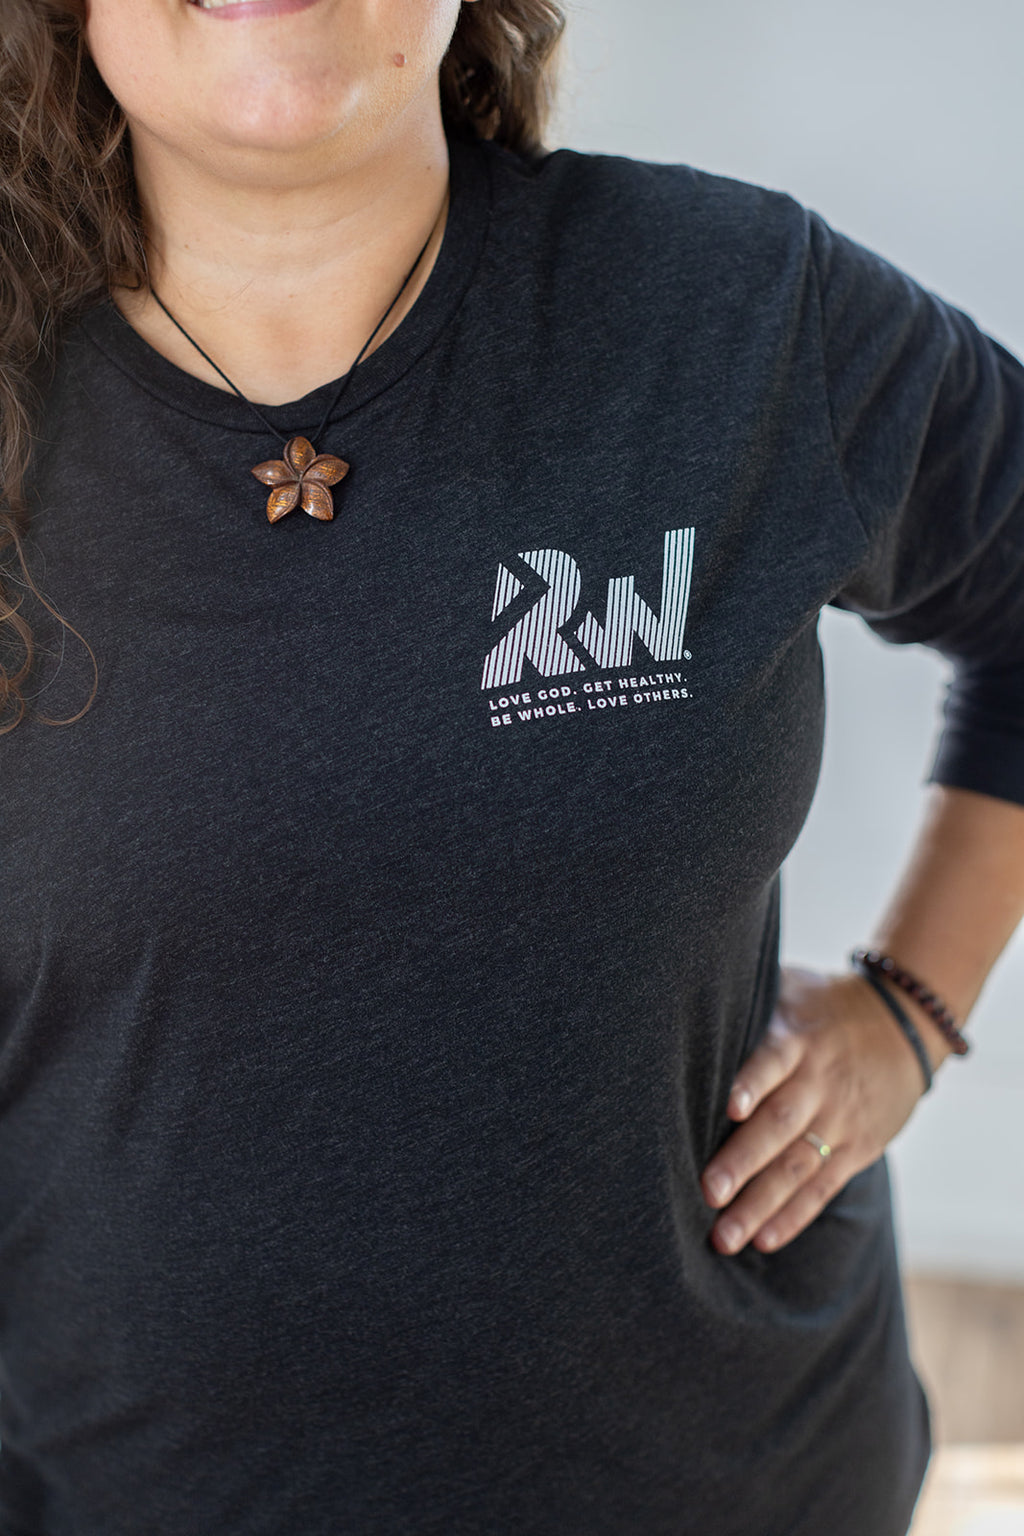 RW Mission Triblend Long Sleeve Tee - XS only